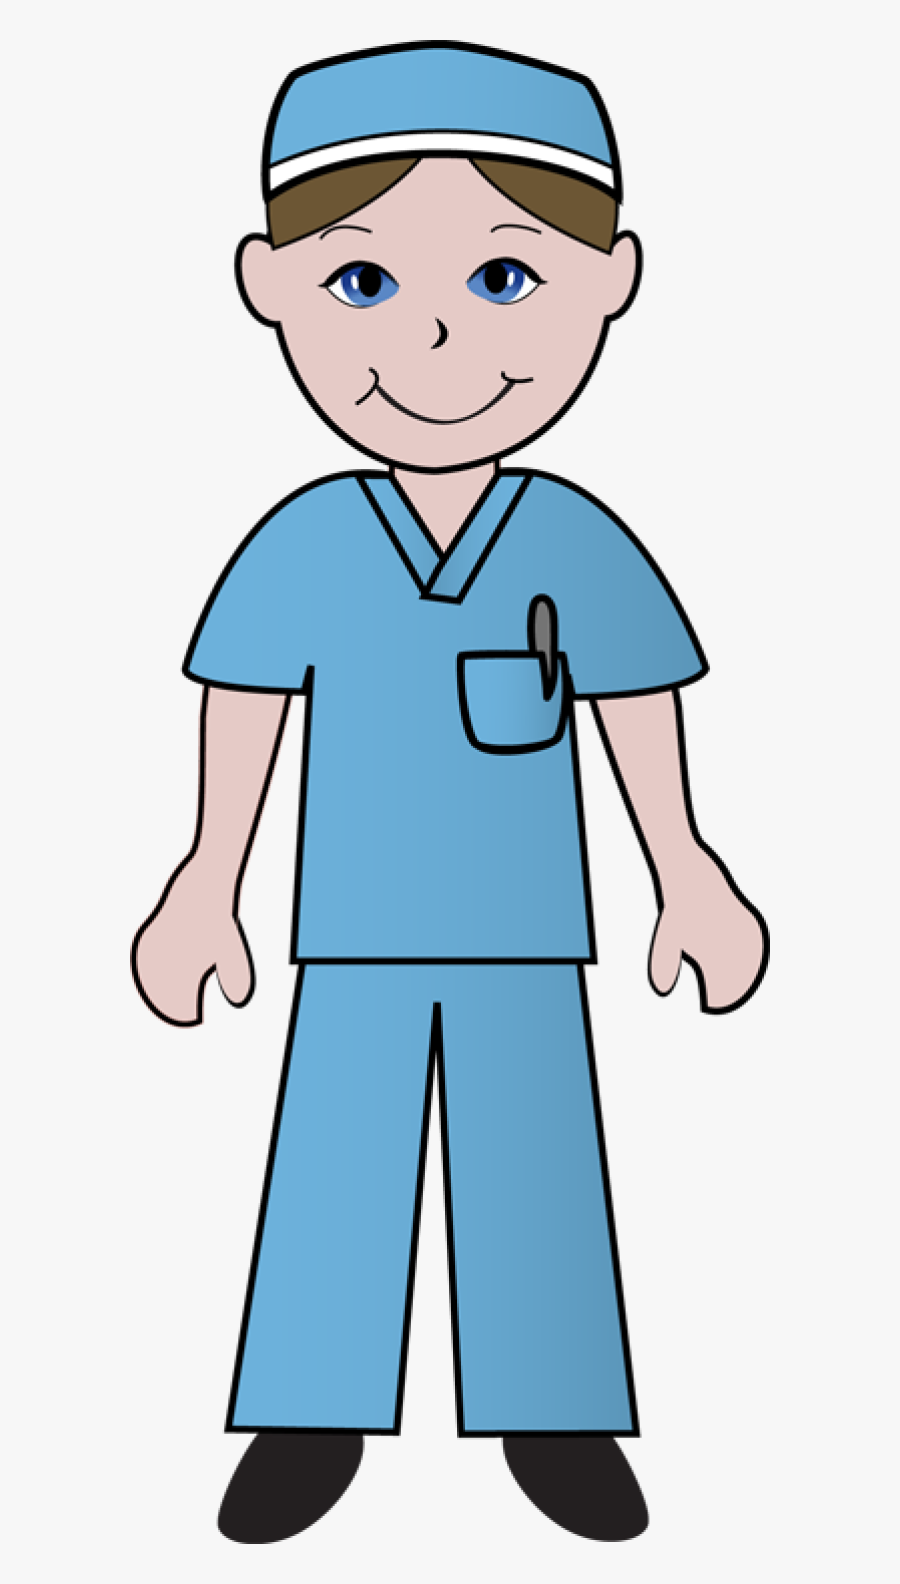 Free Clip Art Of Doctors And Nurses - Doctor In Scrubs Clipart, Transparent Clipart